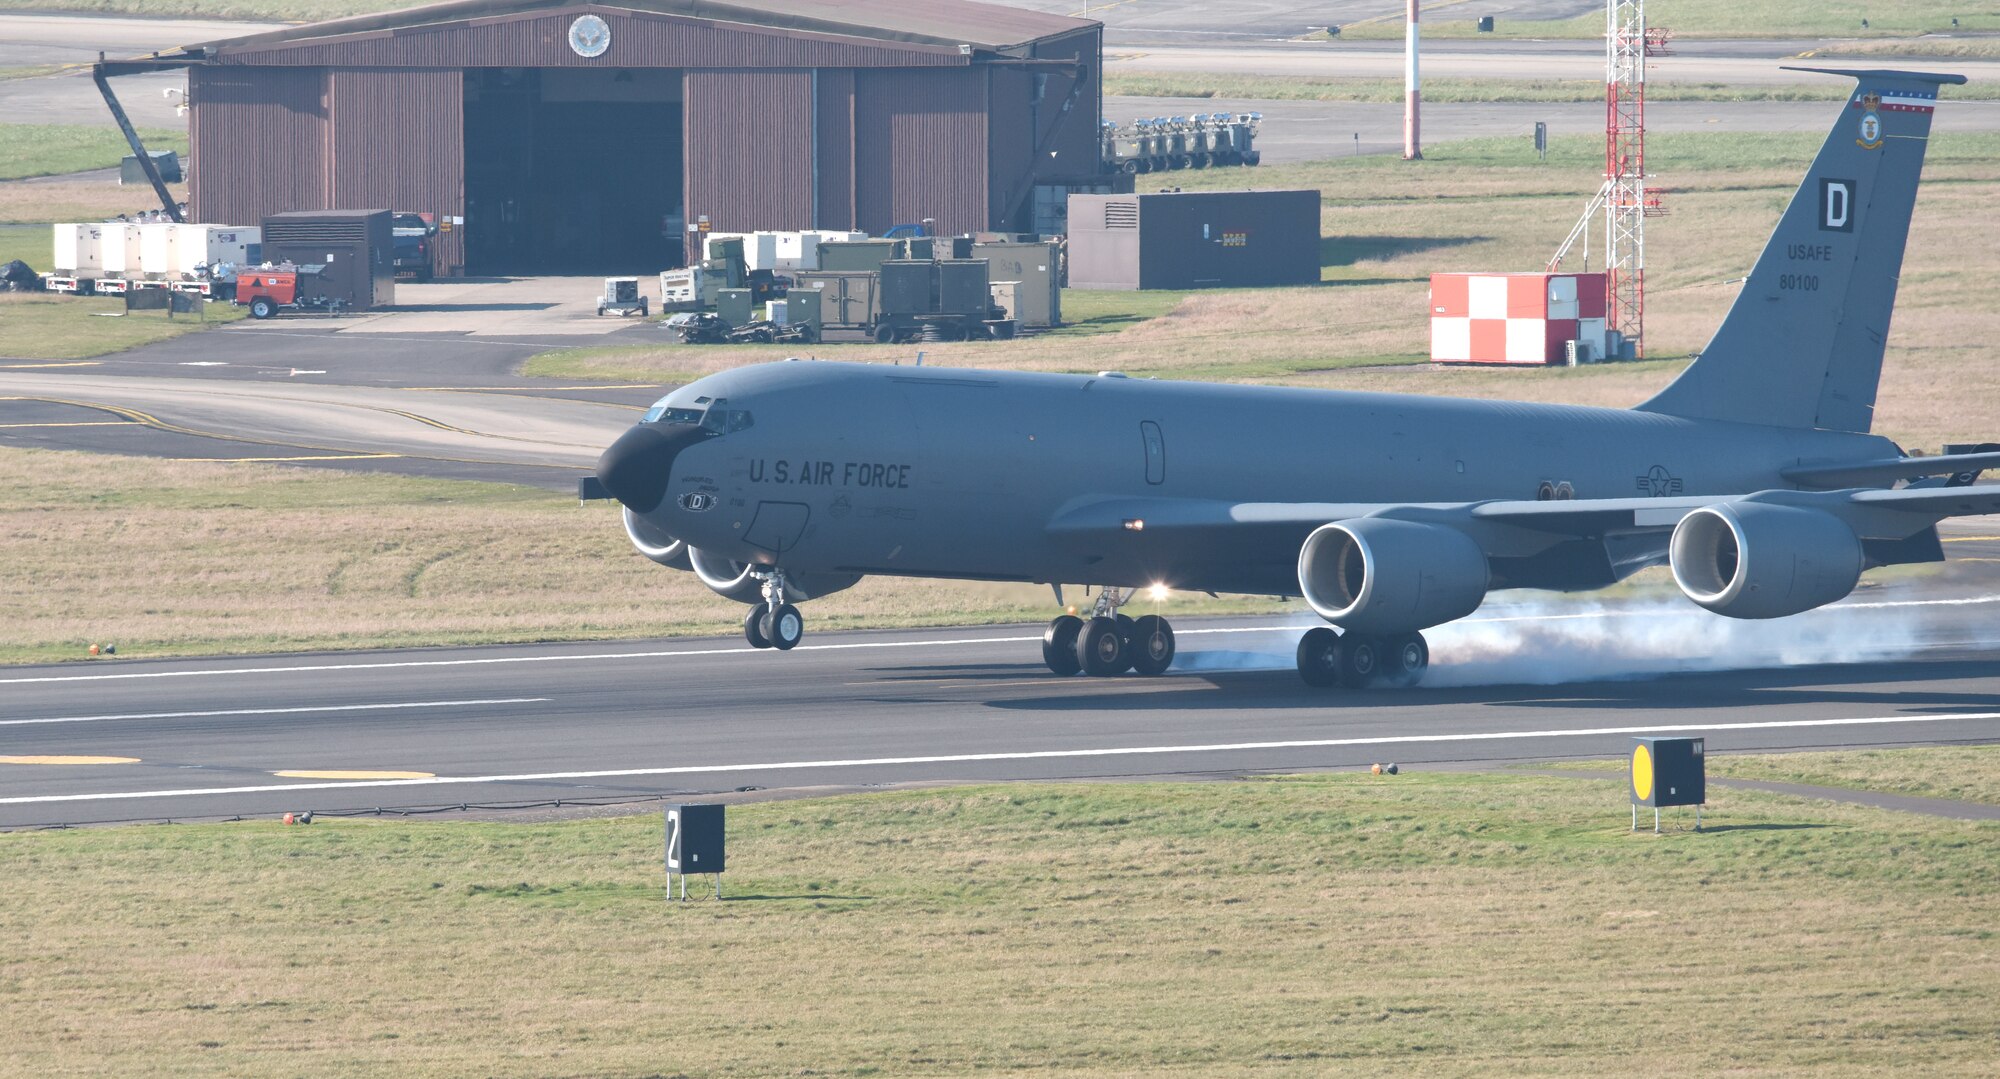 A U.S. Air Force KC-135 Stratotanker assigned to the 100th Air Refueling Wing lands at Royal Air Force Mildenhall, England, March 10, 2022. The 100th ARW is the only permanent U.S. air refueling wing in the European theater that provides critical air refueling support that allows the Expeditionary Air Force to deploy around the globe at a moment’s notice. (U.S. Air Force photo by Karen Abeyasekere)